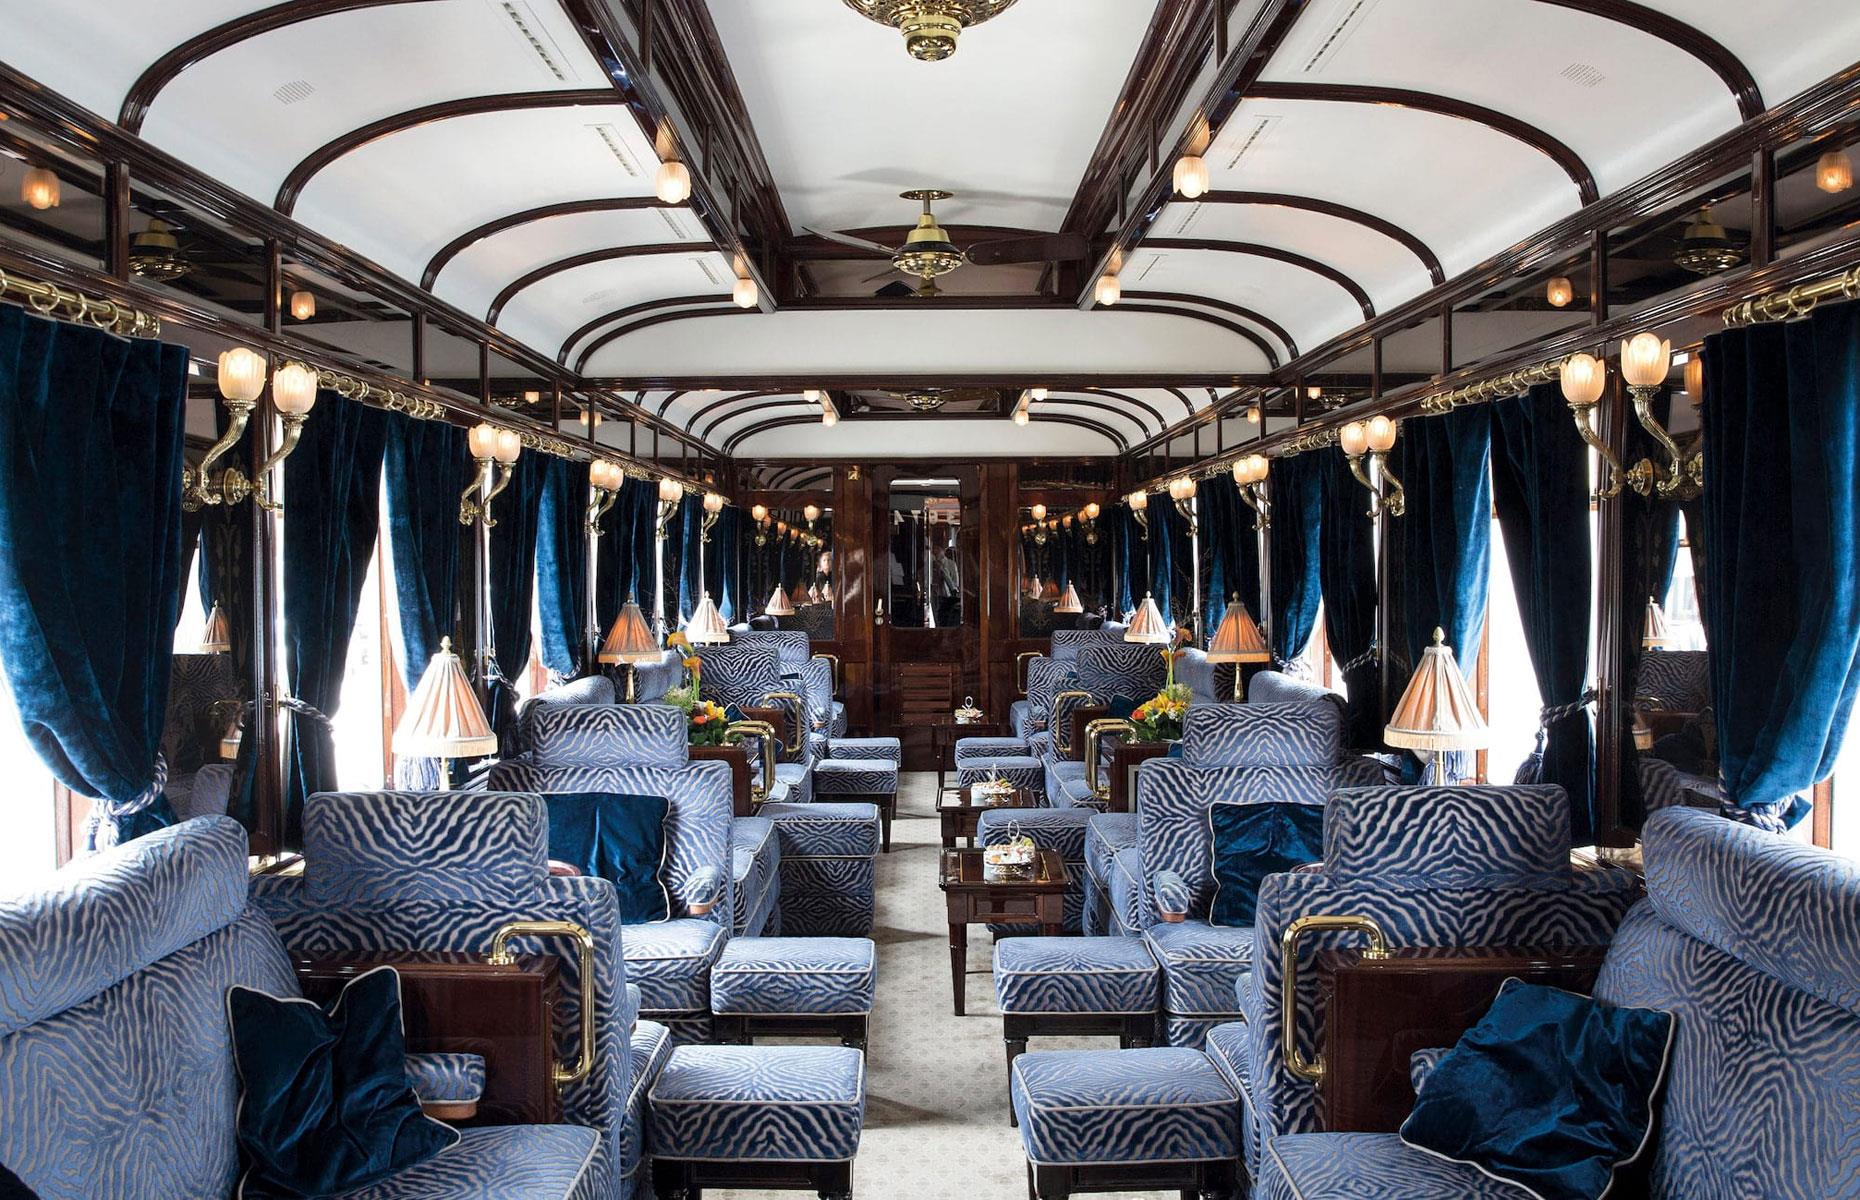 In 2018, Bernard Arnault's LVMH acquired high-end travel company Belmond, which made the French billionaire the ultimate owner of the peerless Venice Simplon-Orient-Express, the world's most iconic train. The Art Deco beauty, which travels between London and Venice and other destinations in Europe, exudes timeless glamour and offers its lucky passengers unbridled luxury.